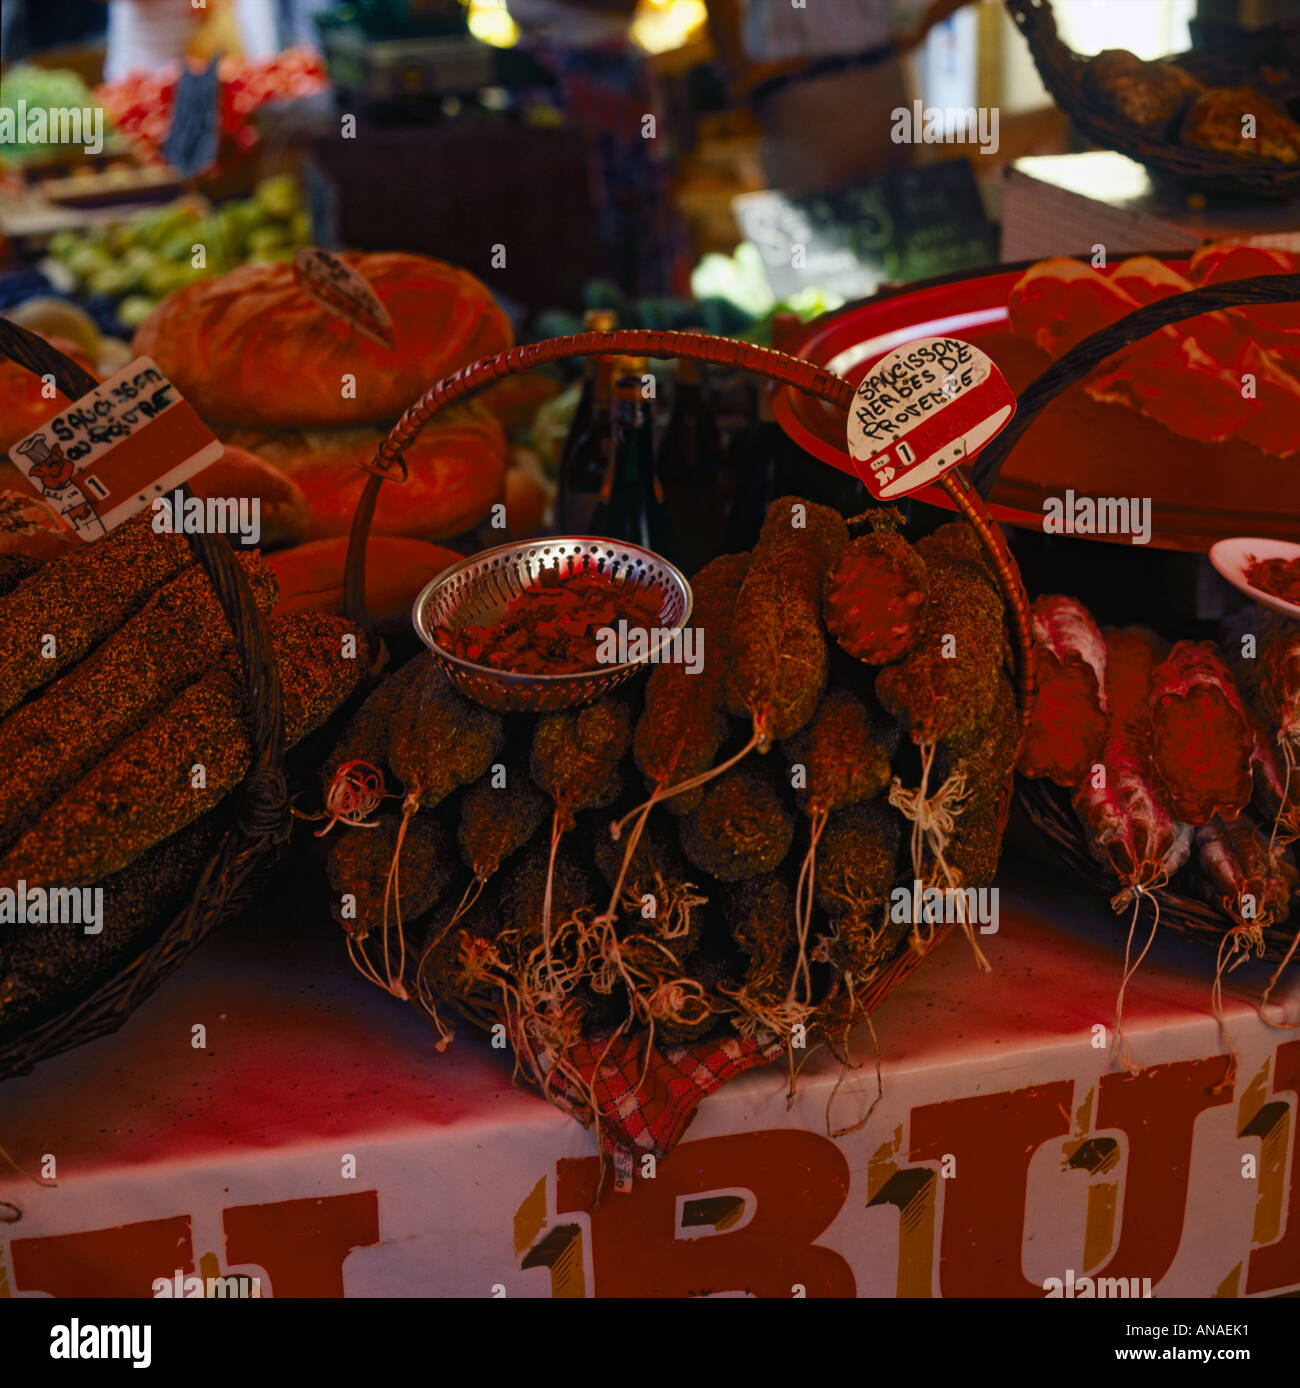 A colourful charuterie display of spicy meats and sausages in wicker baskets in a market in the South of France Stock Photo